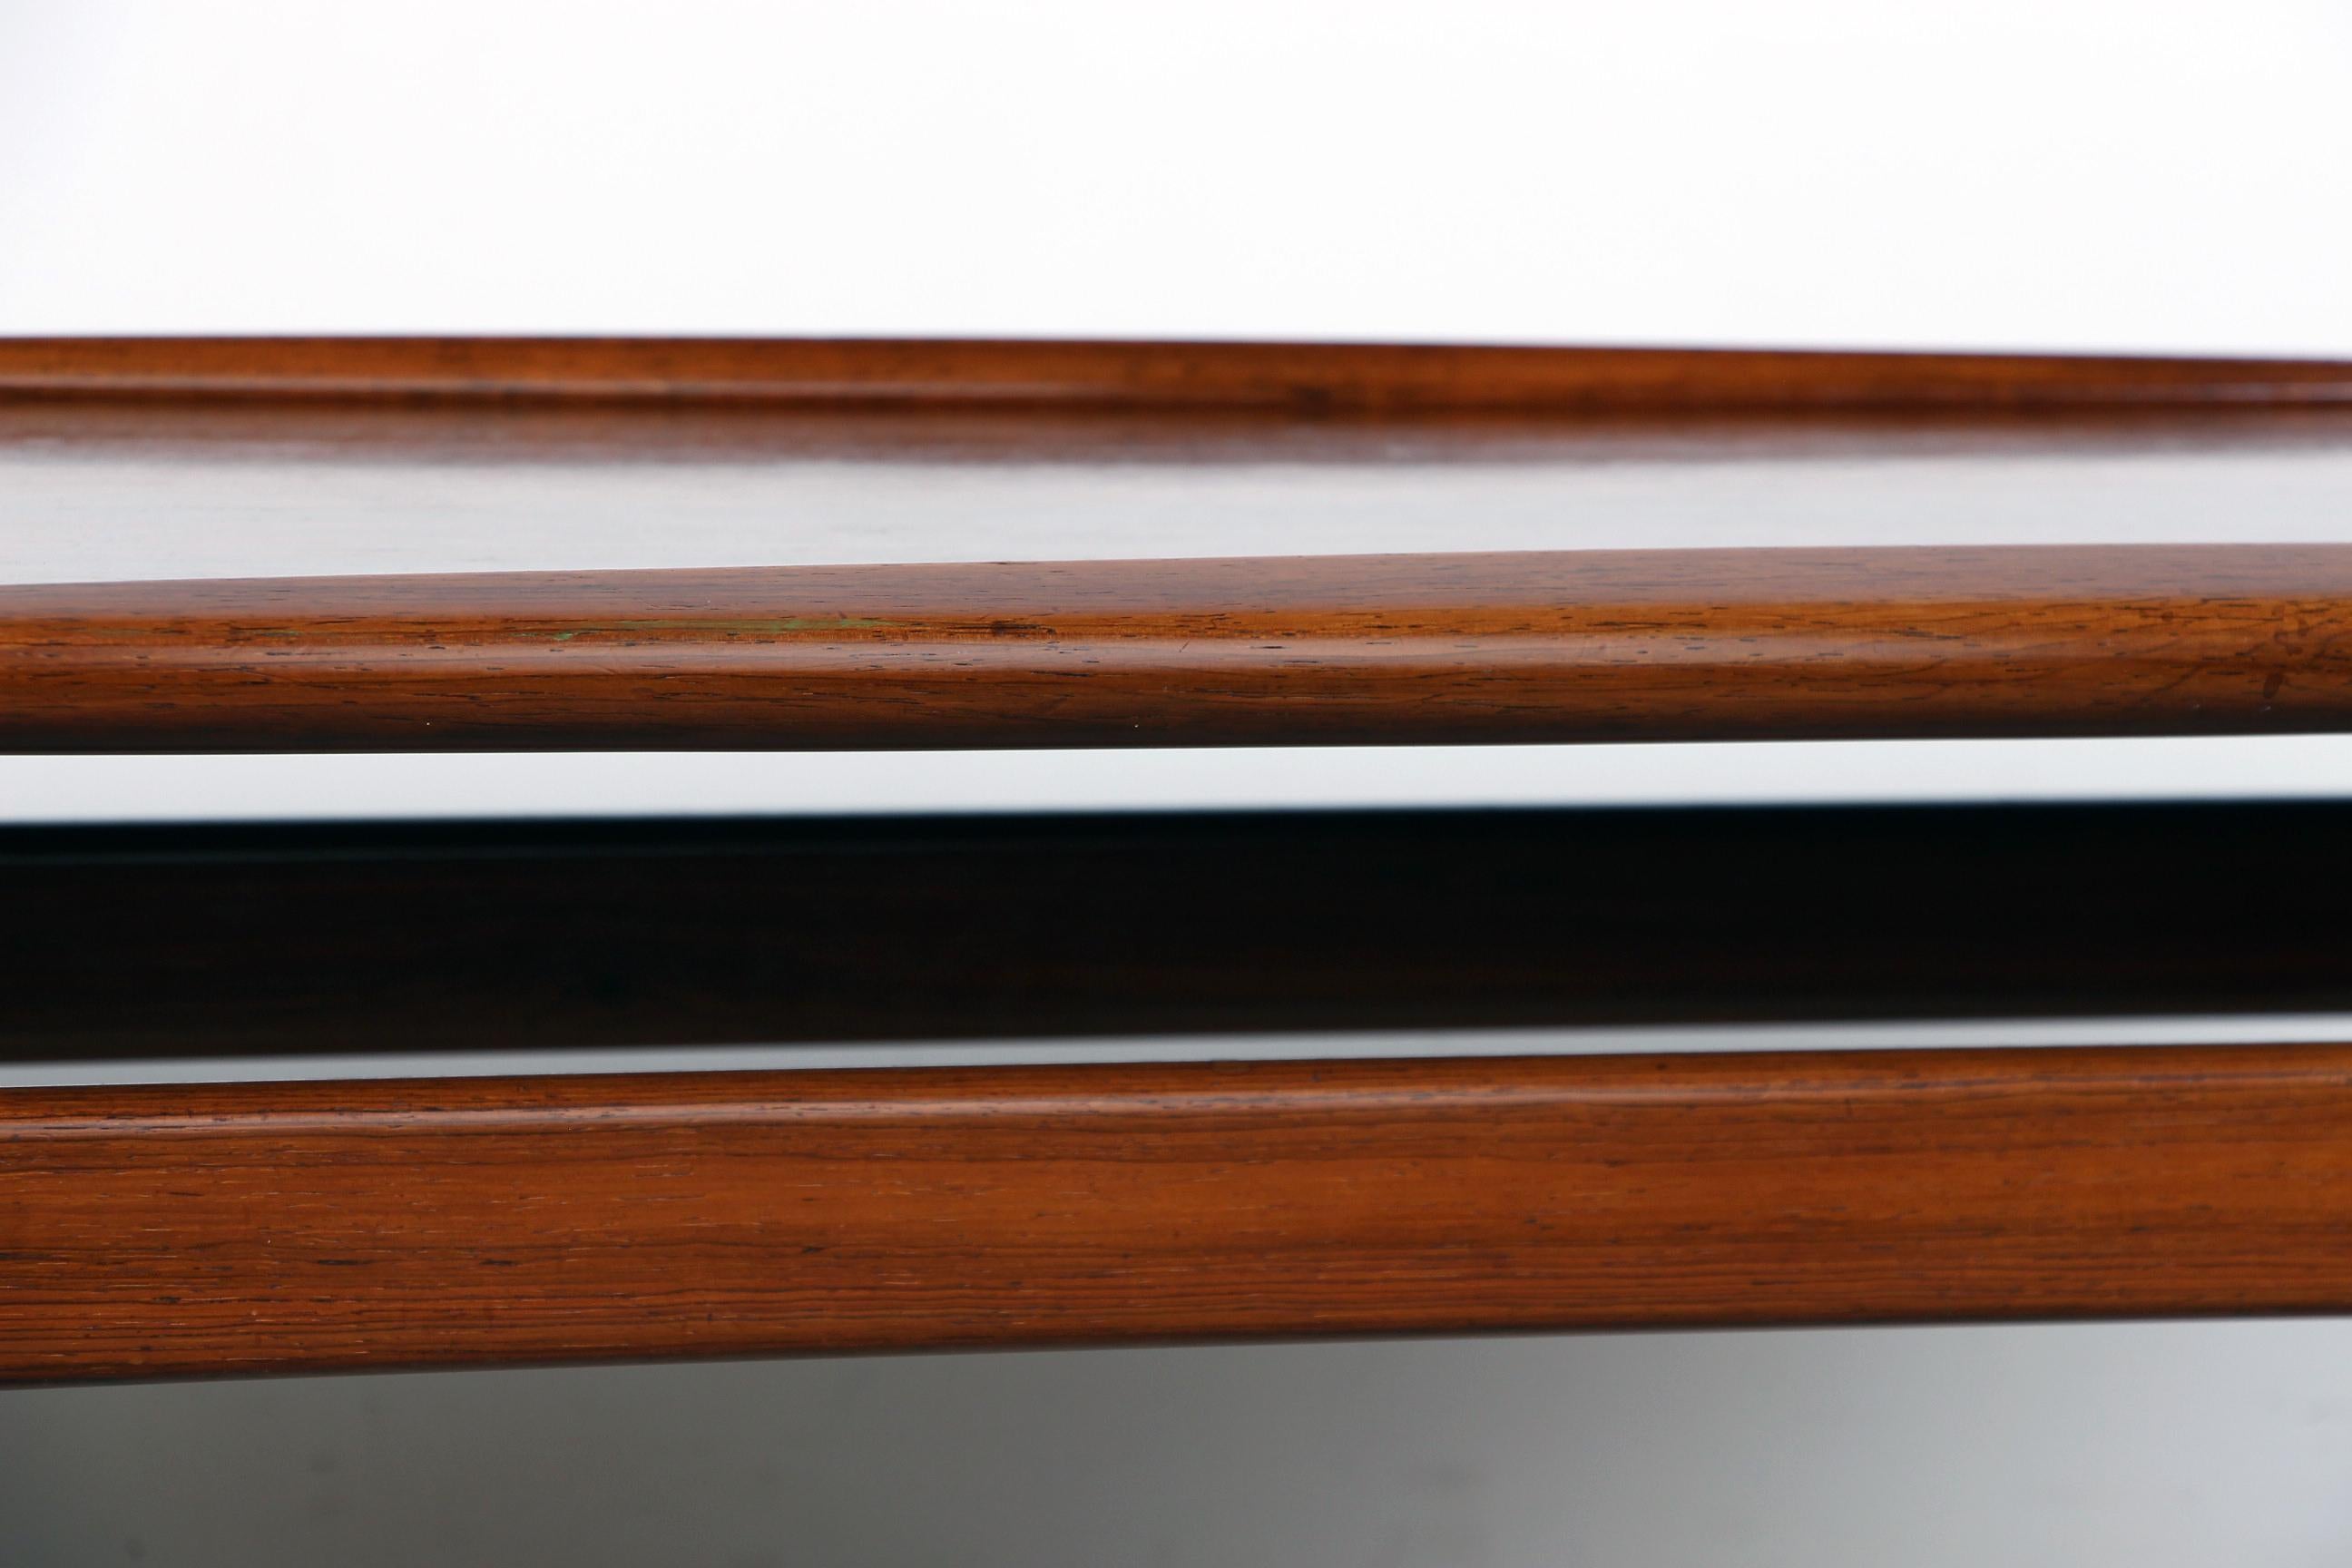 Mid-20th Century Danish Rosewood Coffee Table by Grete Jalk for Poul Jeppessen